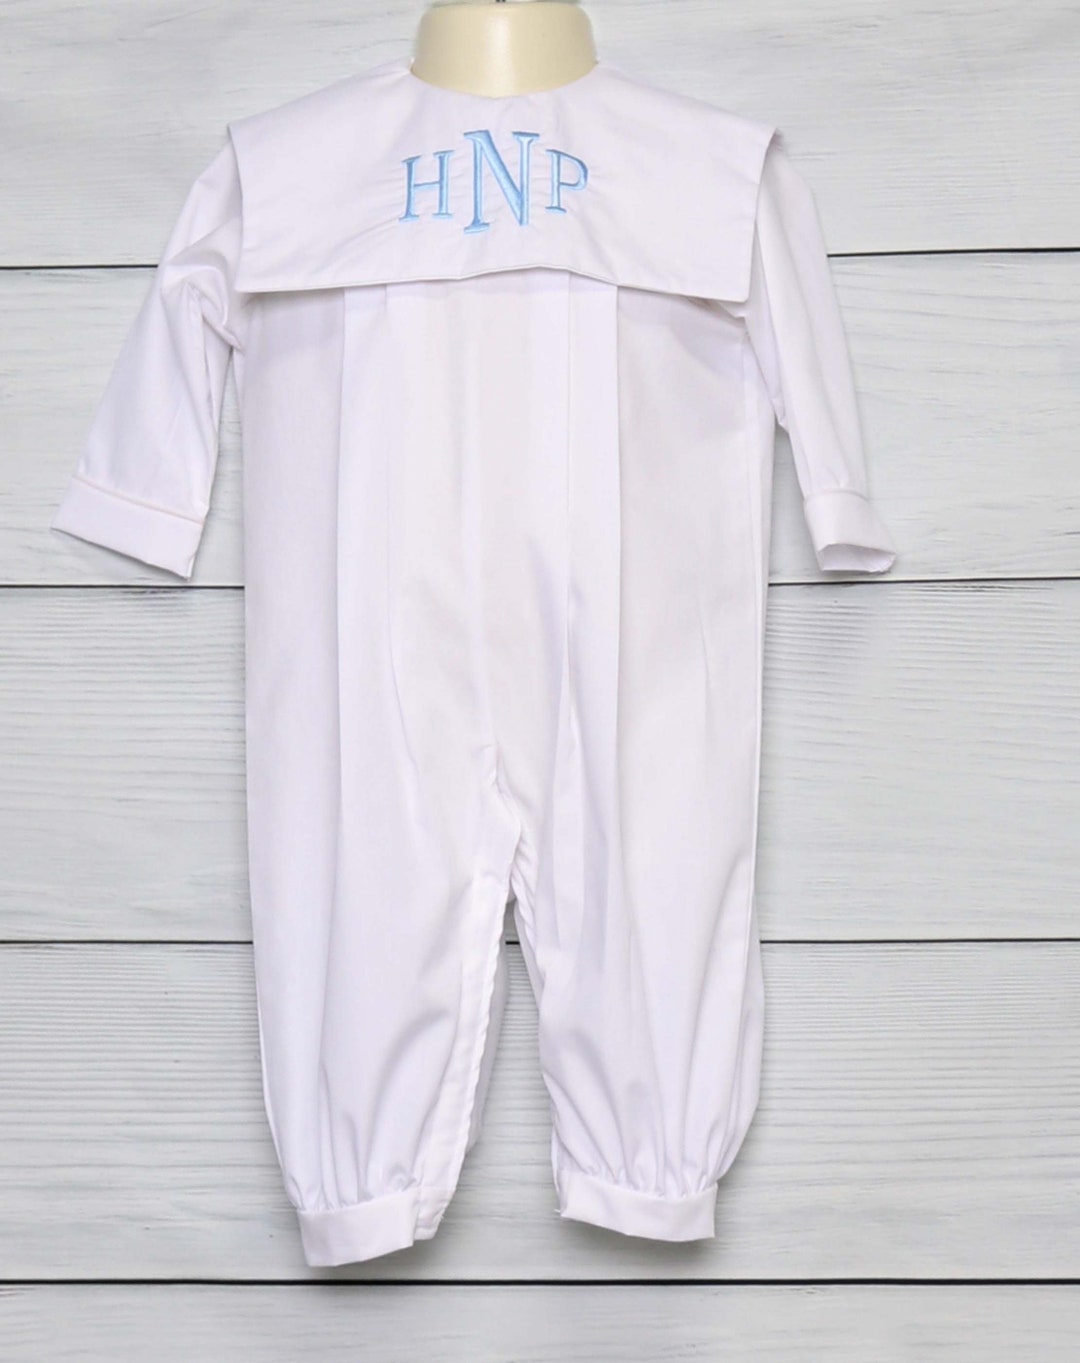 Boys Christening Outfit Baptism Outfit Boy Baby Boy Baptism - Etsy